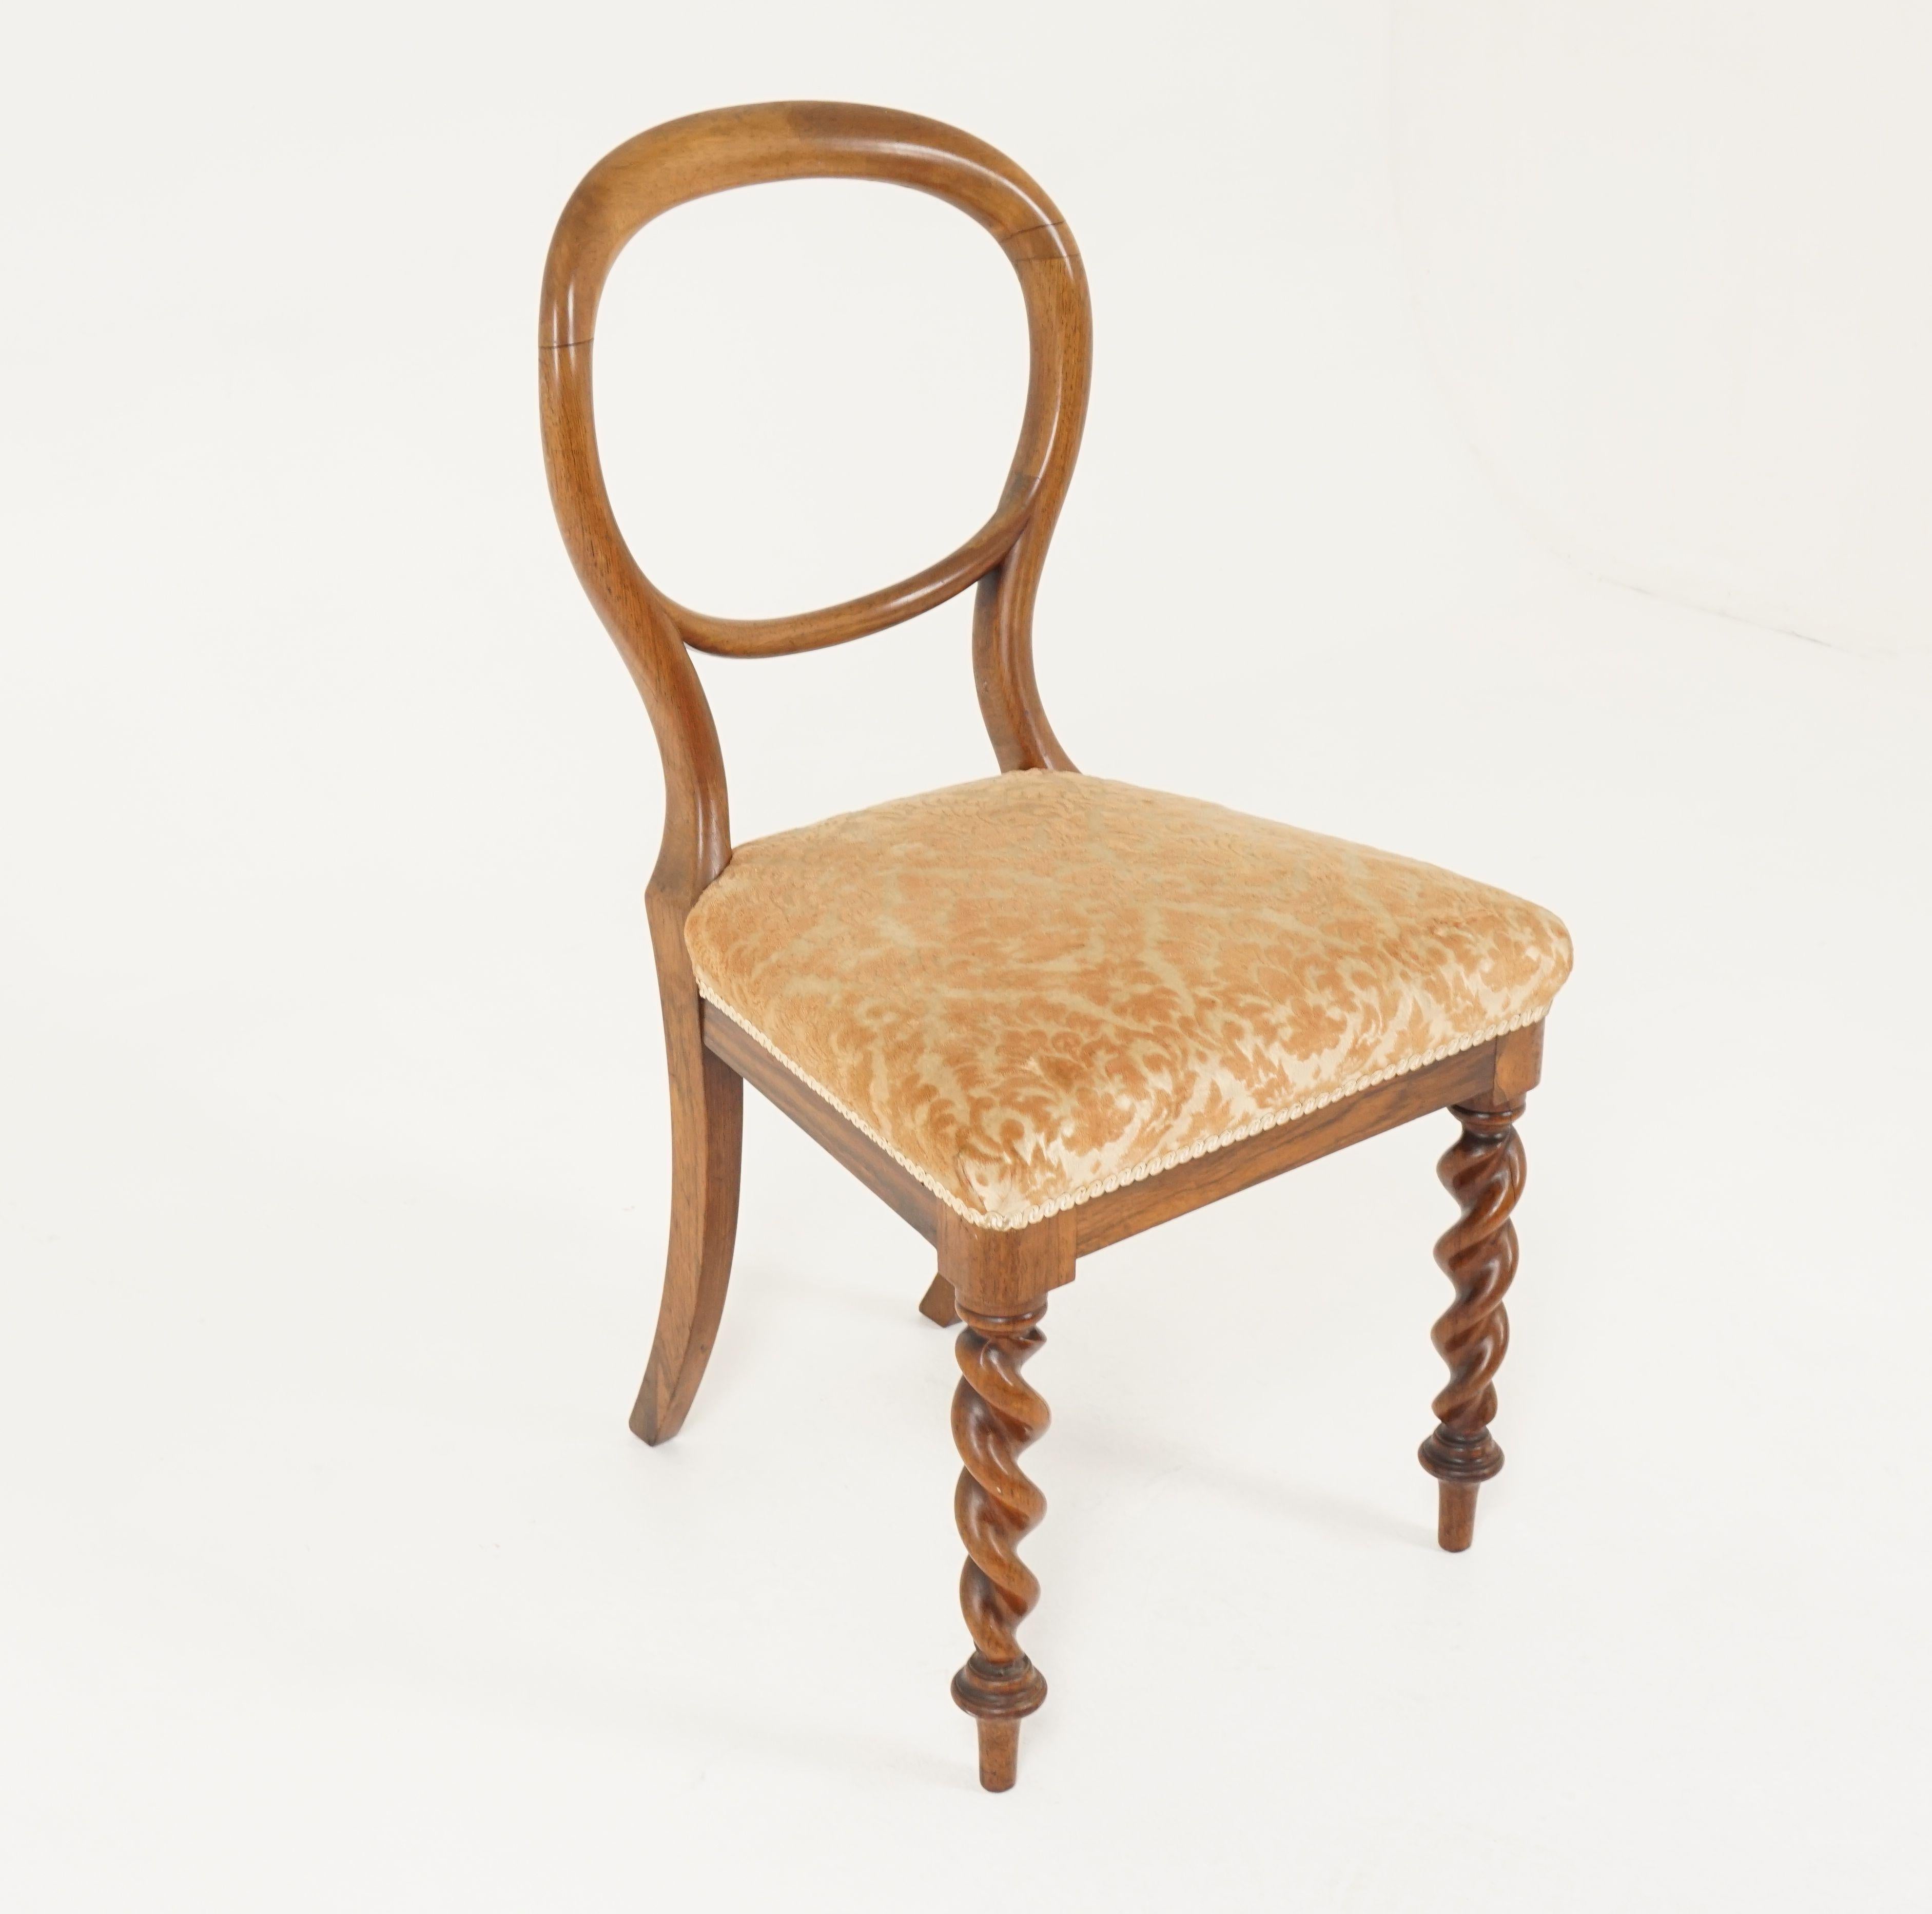 Scottish Antique Victorian Balloon Back Chair, Upholstered Chair, Scotland 1880, B2396